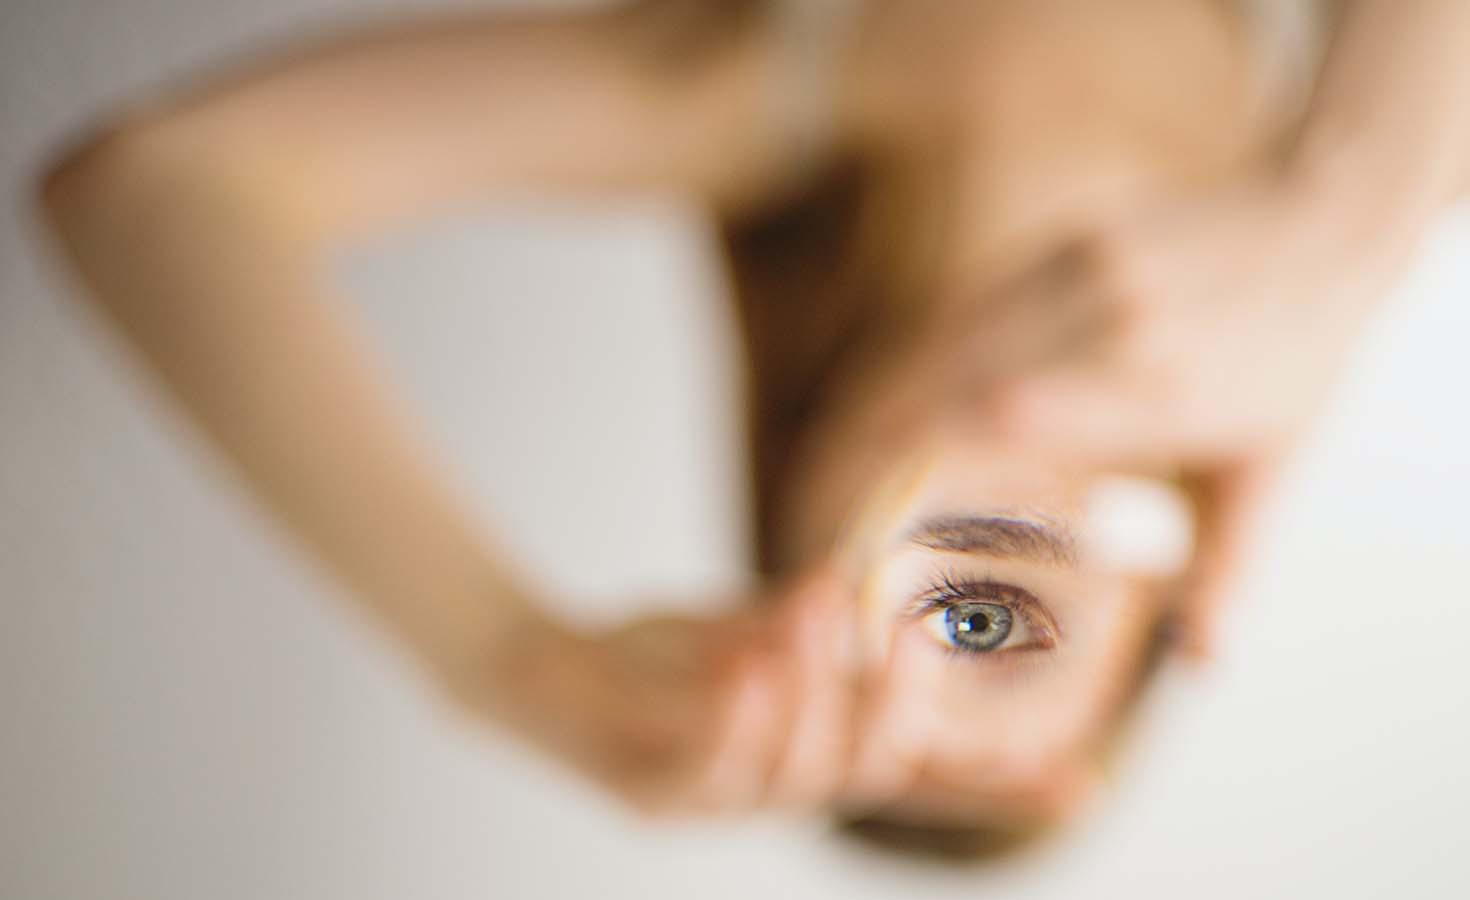 Blurred image with focus on woman's eye